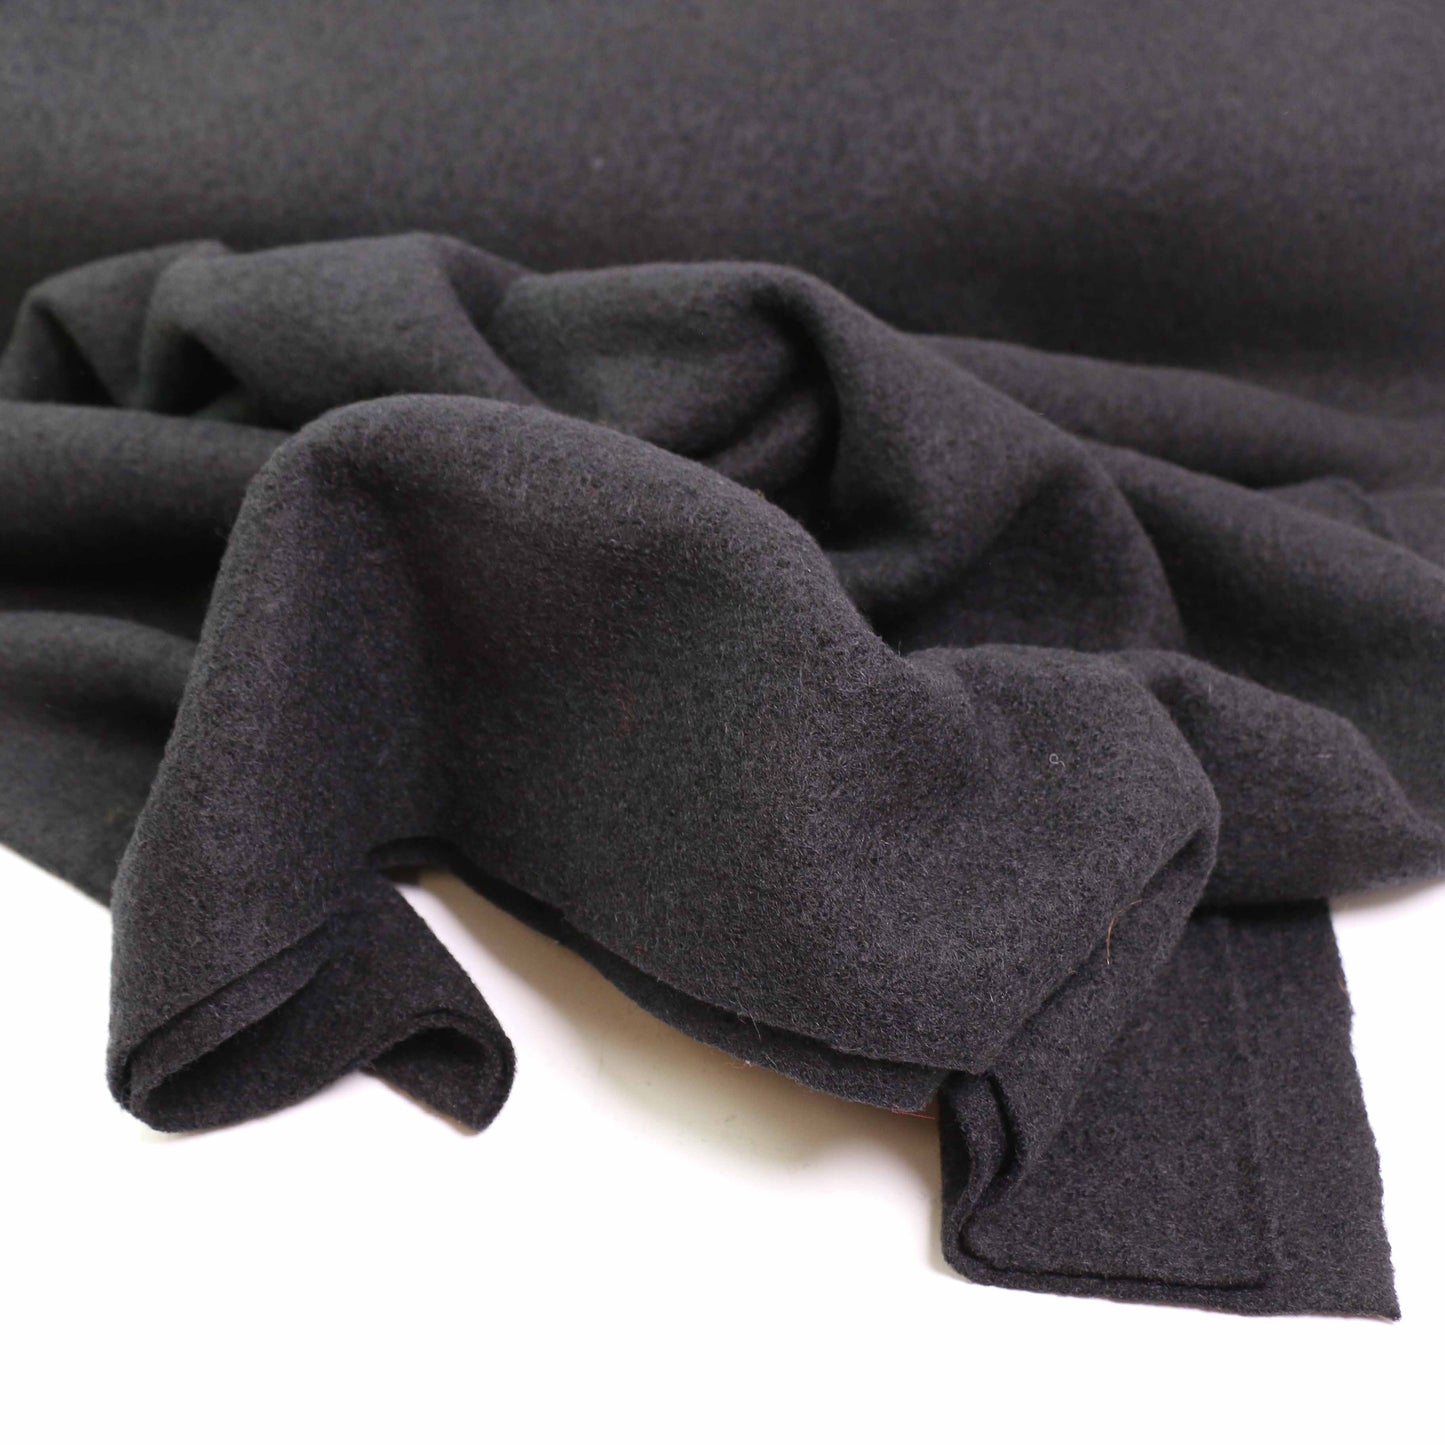 Boiled Wool Fabric - Black, navy, teal, mustard, charcoal